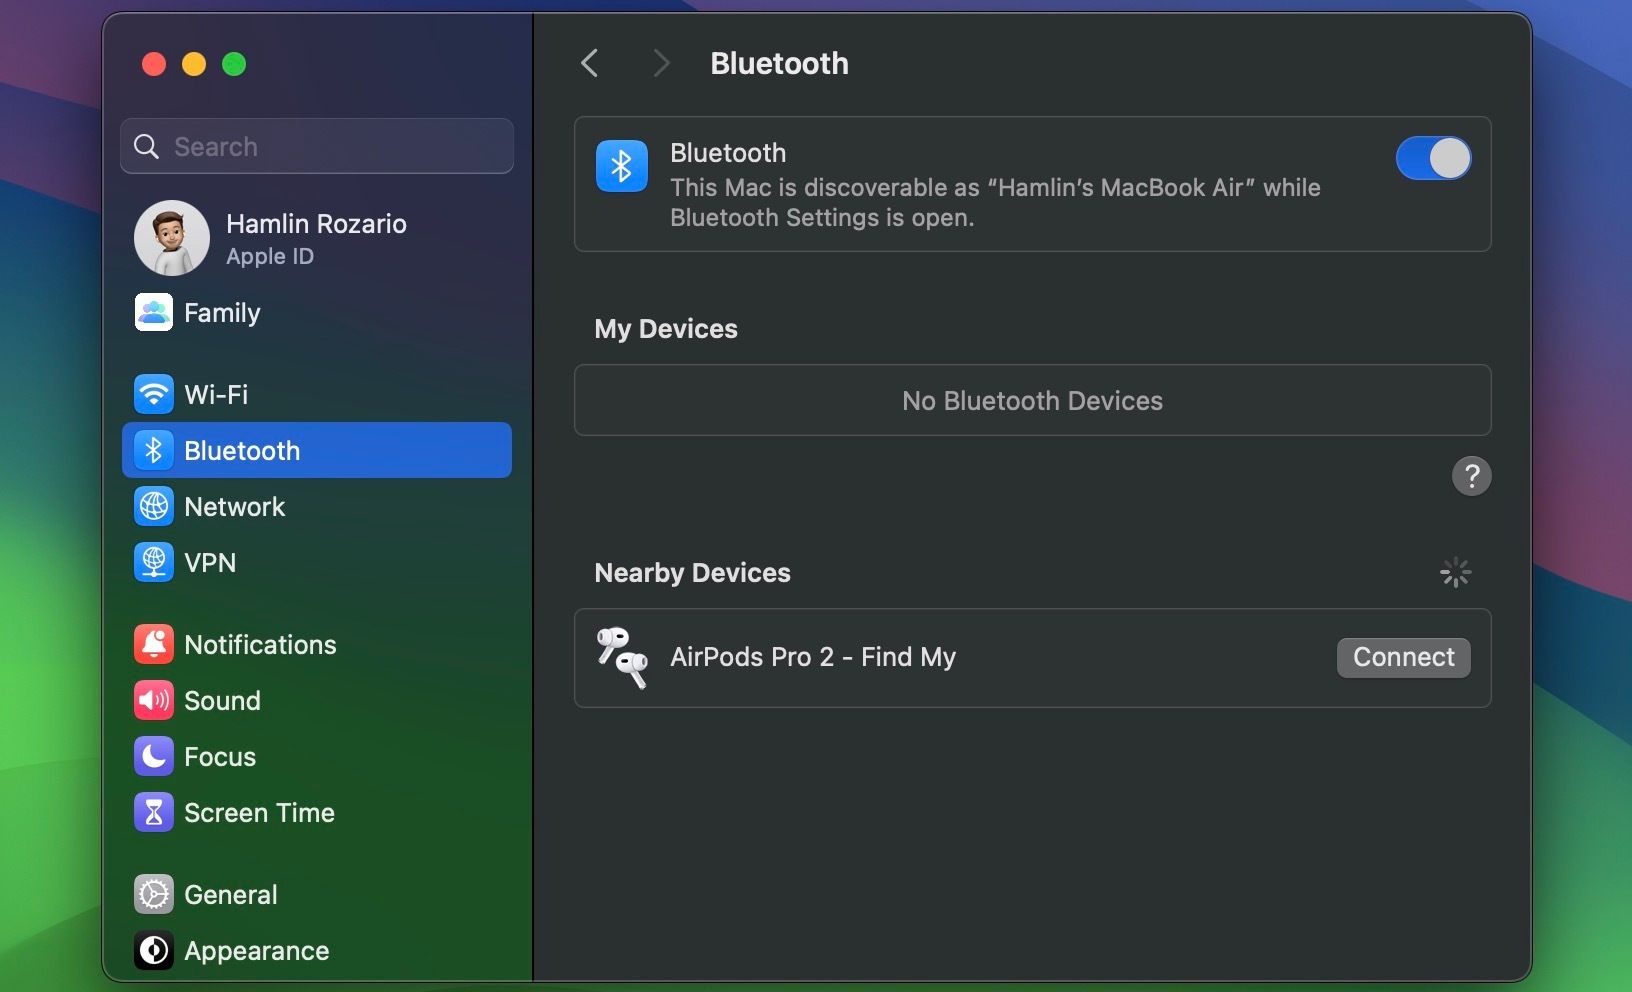 AirPods Pro appearing under Nearby Devices in Bluetooth settings